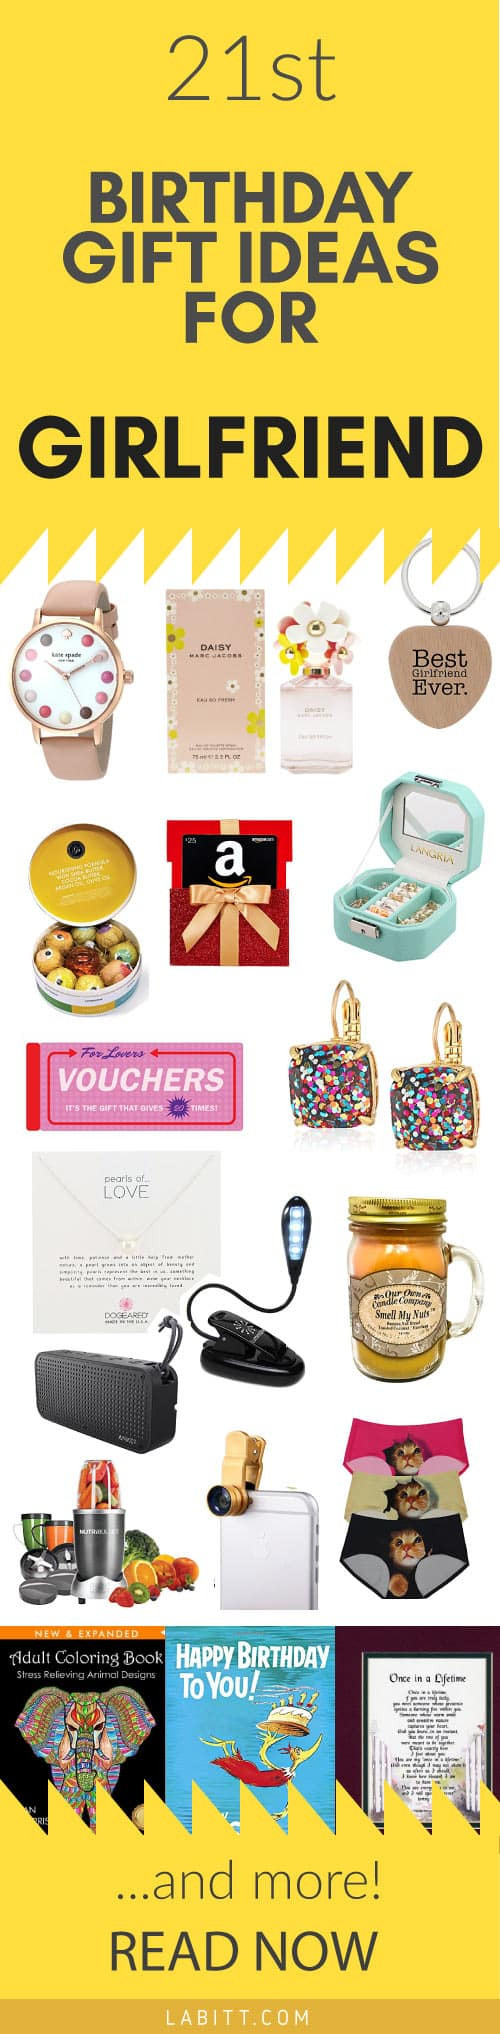 Cool Gift Ideas For Girlfriend
 Creative 21st Birthday Gift Ideas for Girlfriend 21